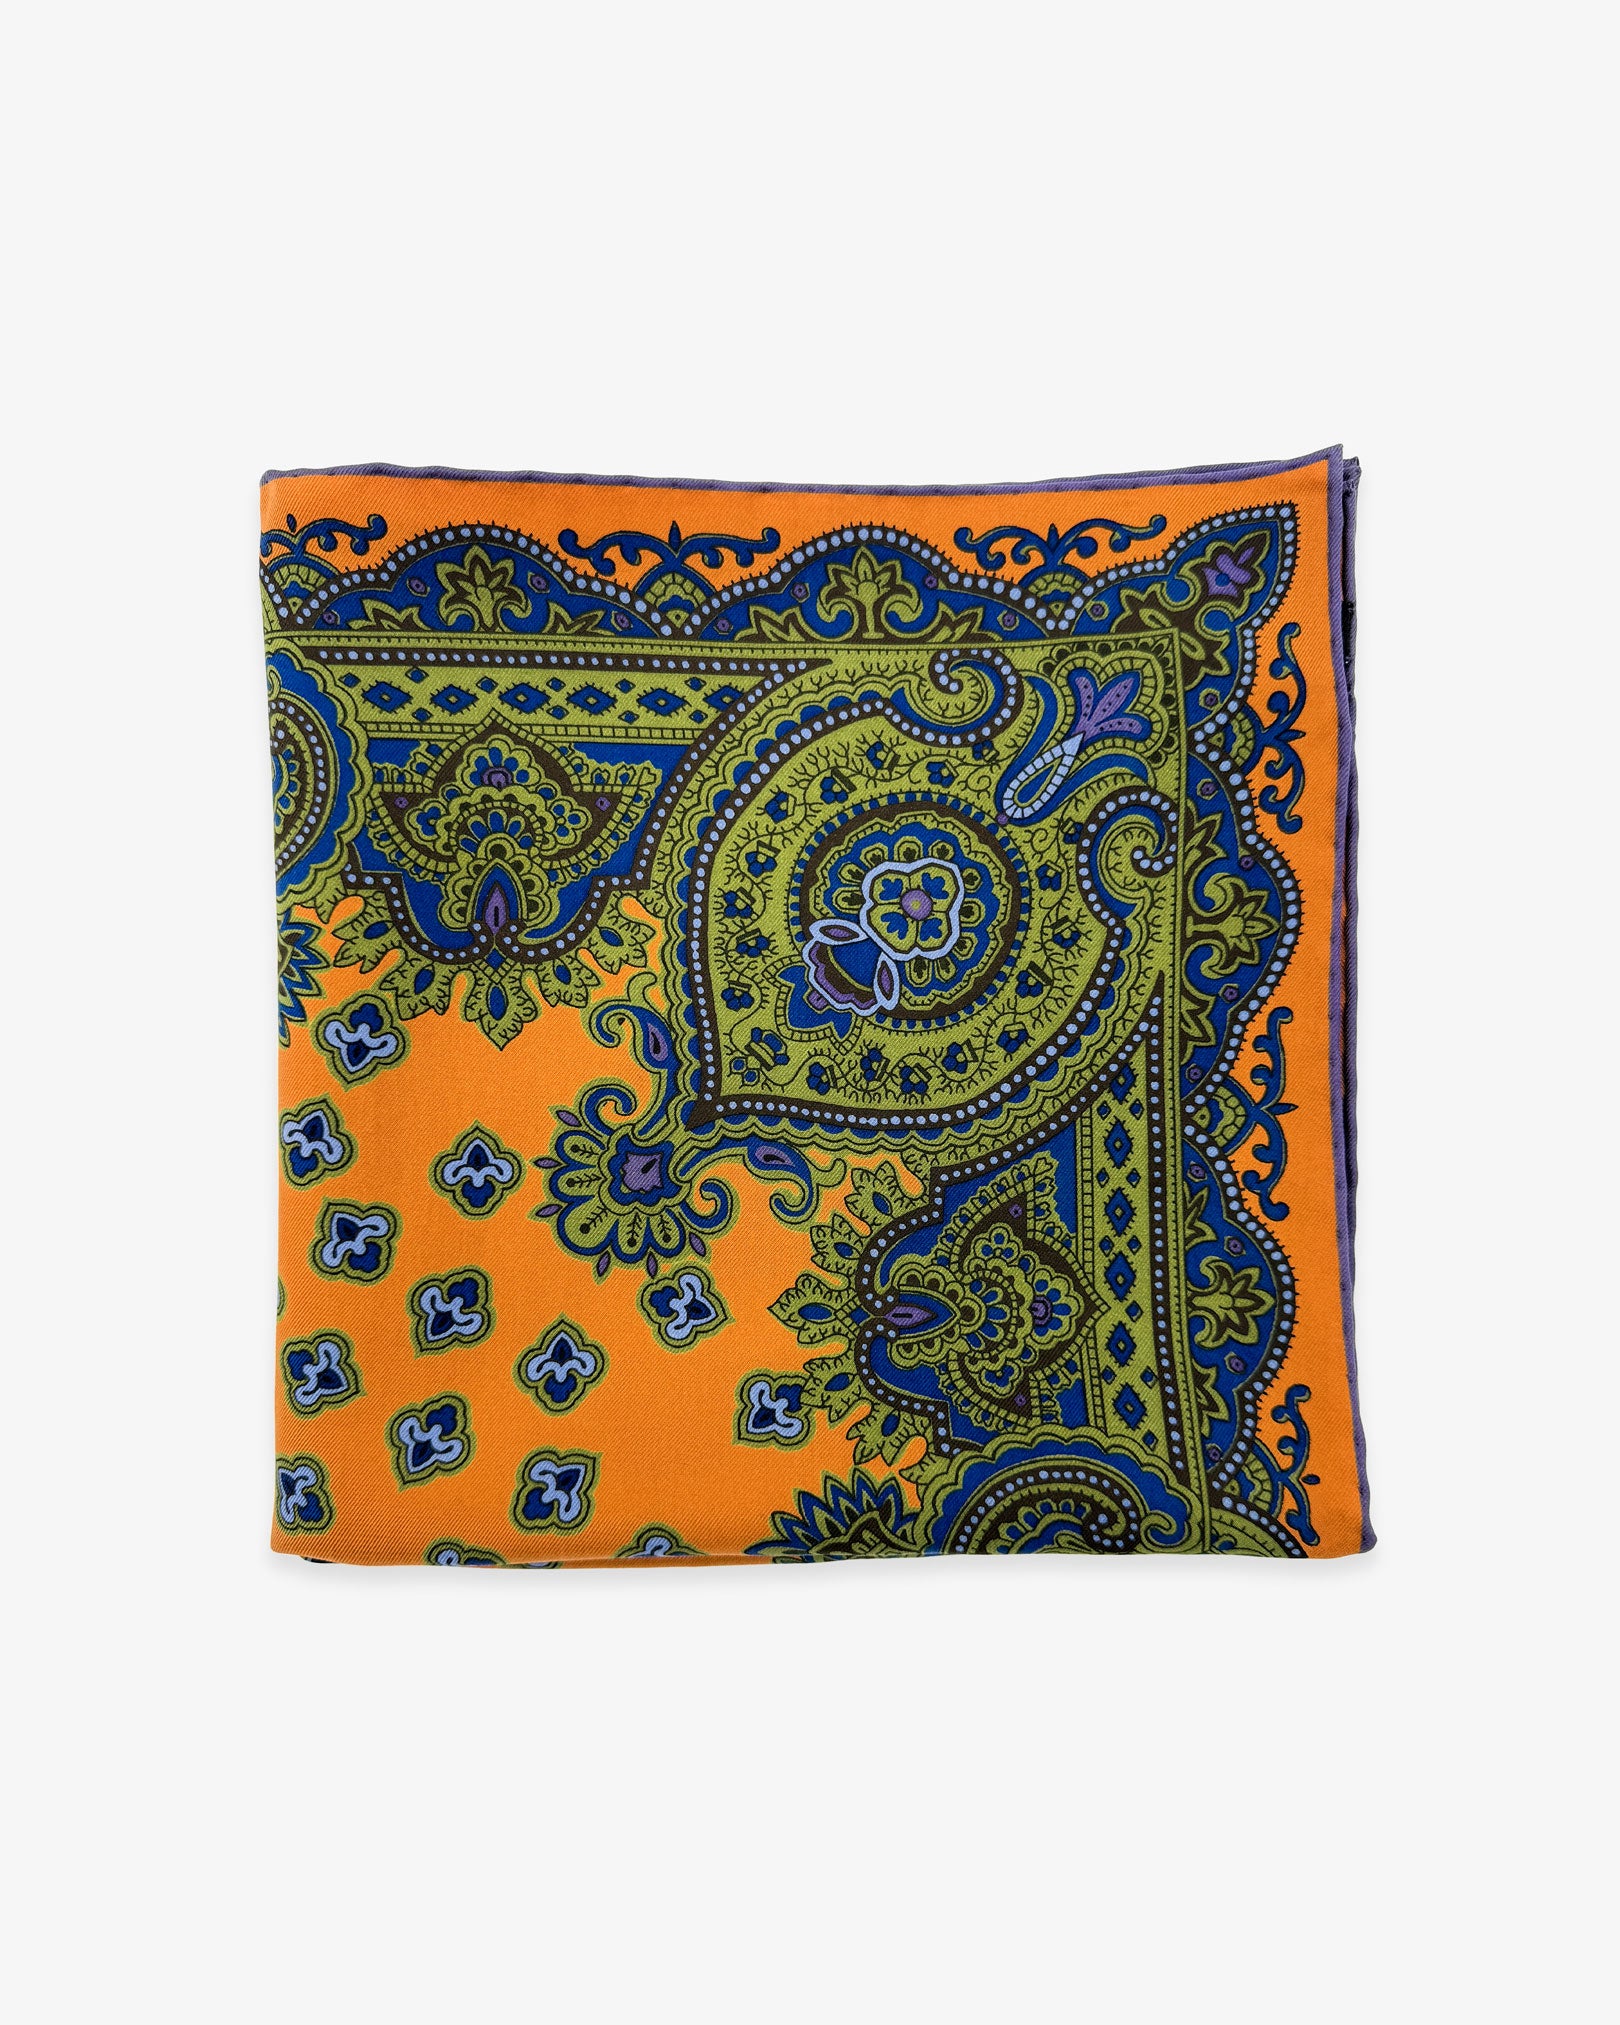 The 'Ambleside' pocket square from SOHO Scarves Madder silk collection. Folded into a quarter, showing the various traditional stylised forms in orange, green and blue.